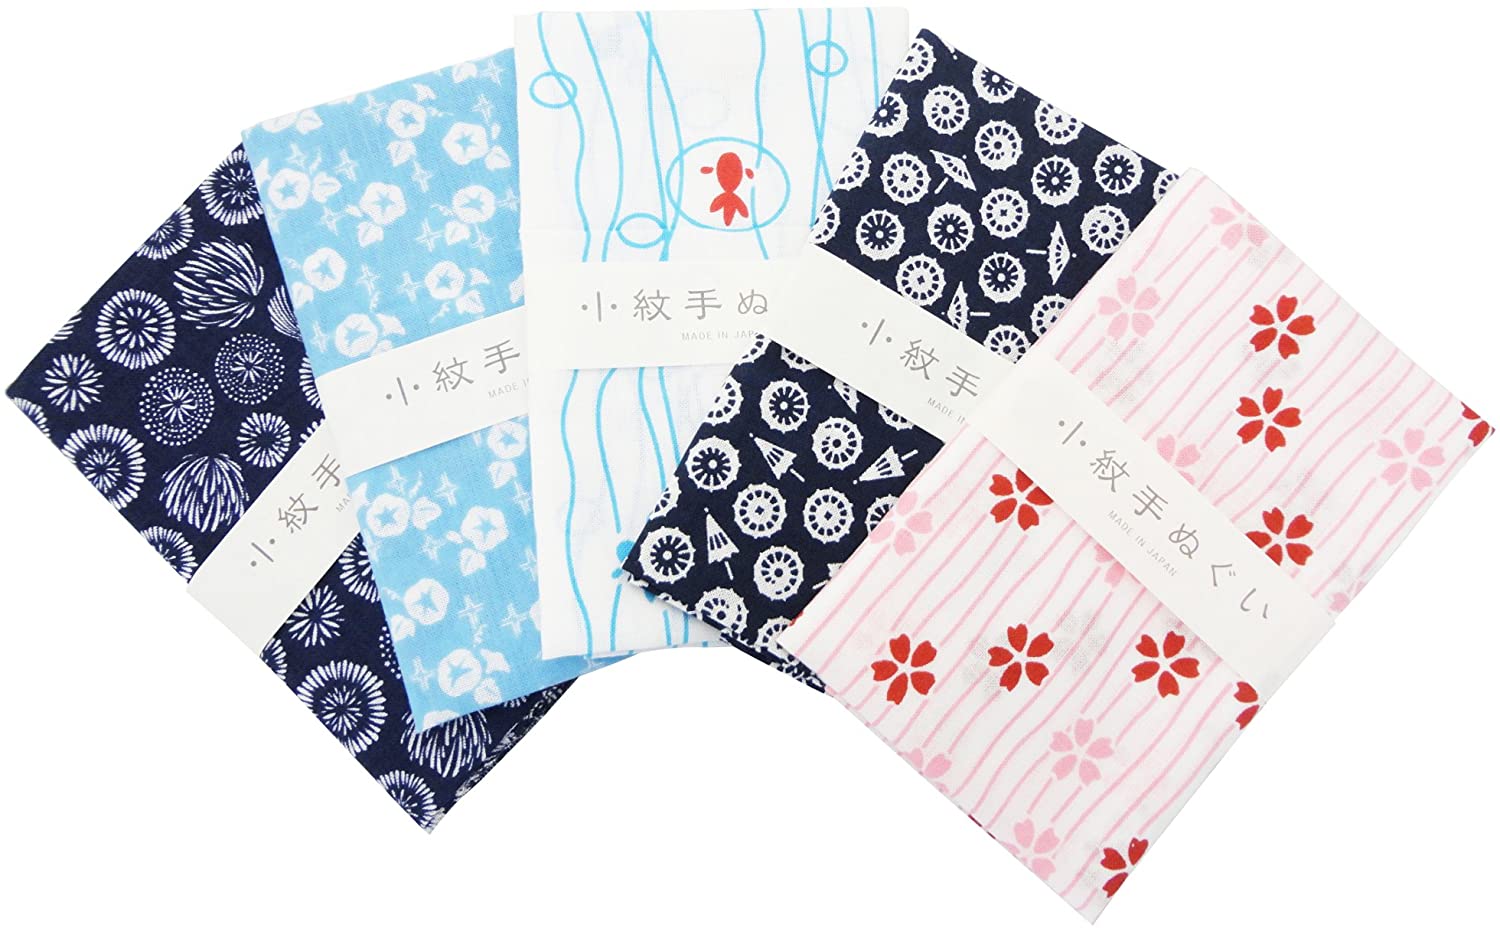 Japanese traditional towel TENUGUI Festival NEW COTTON MADE IN JAPAN